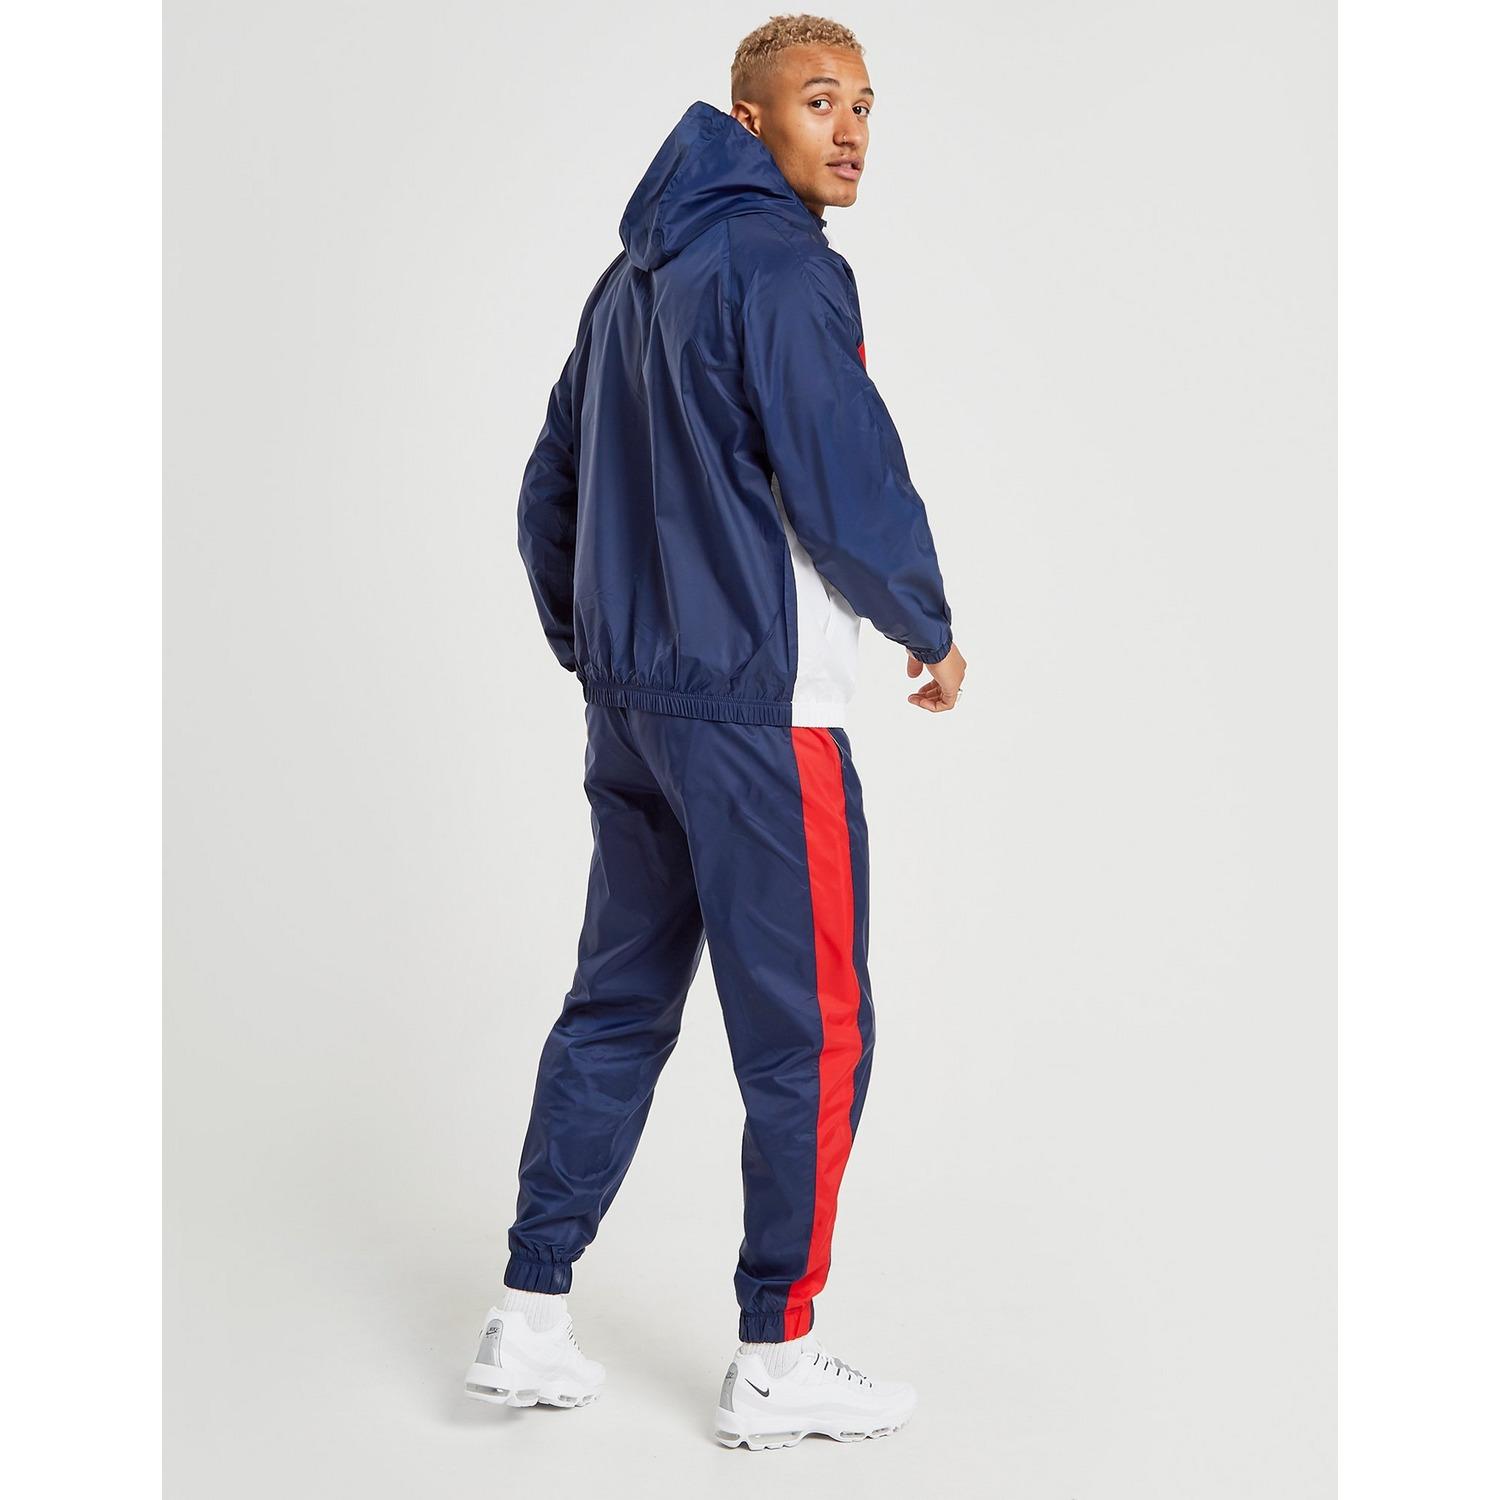 blue red and white nike sweatsuit